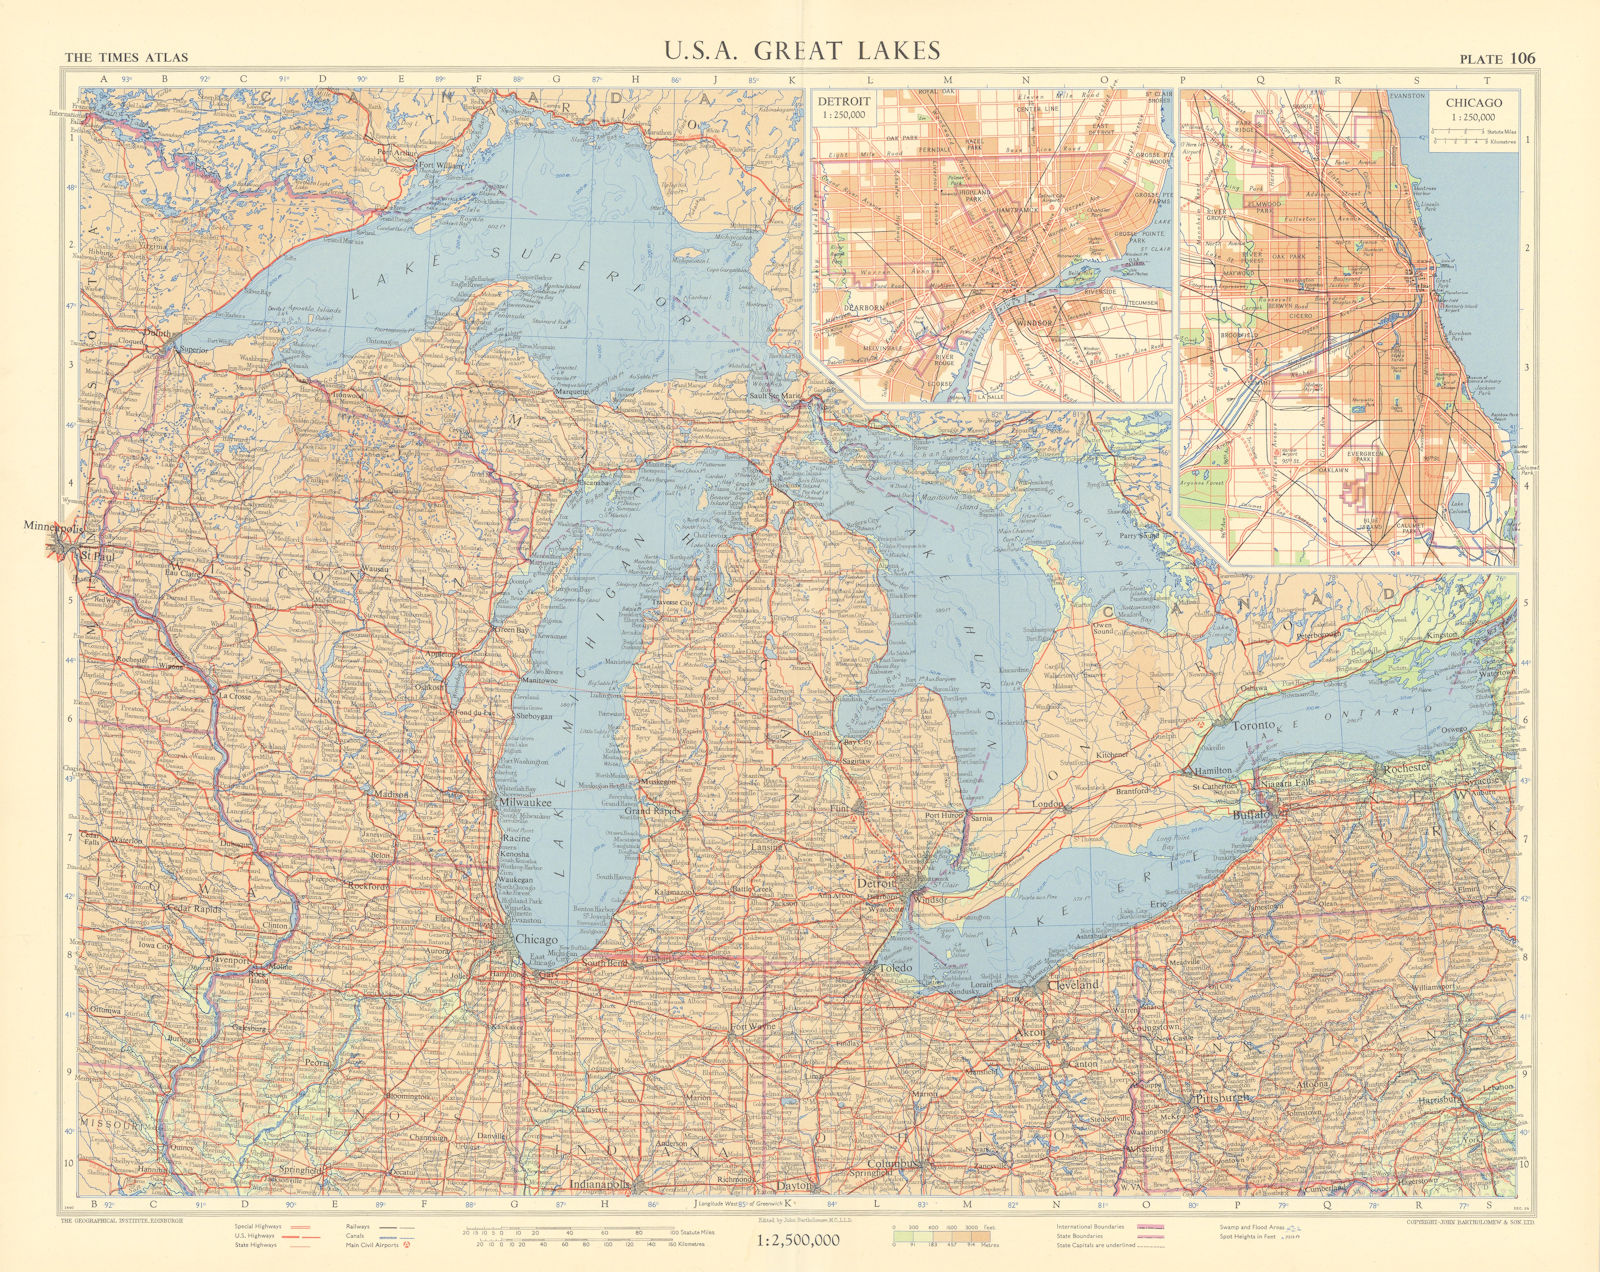 USA Great Lakes. Detroit & Chicago plans. Midwestern USA. TIMES 1957 old map